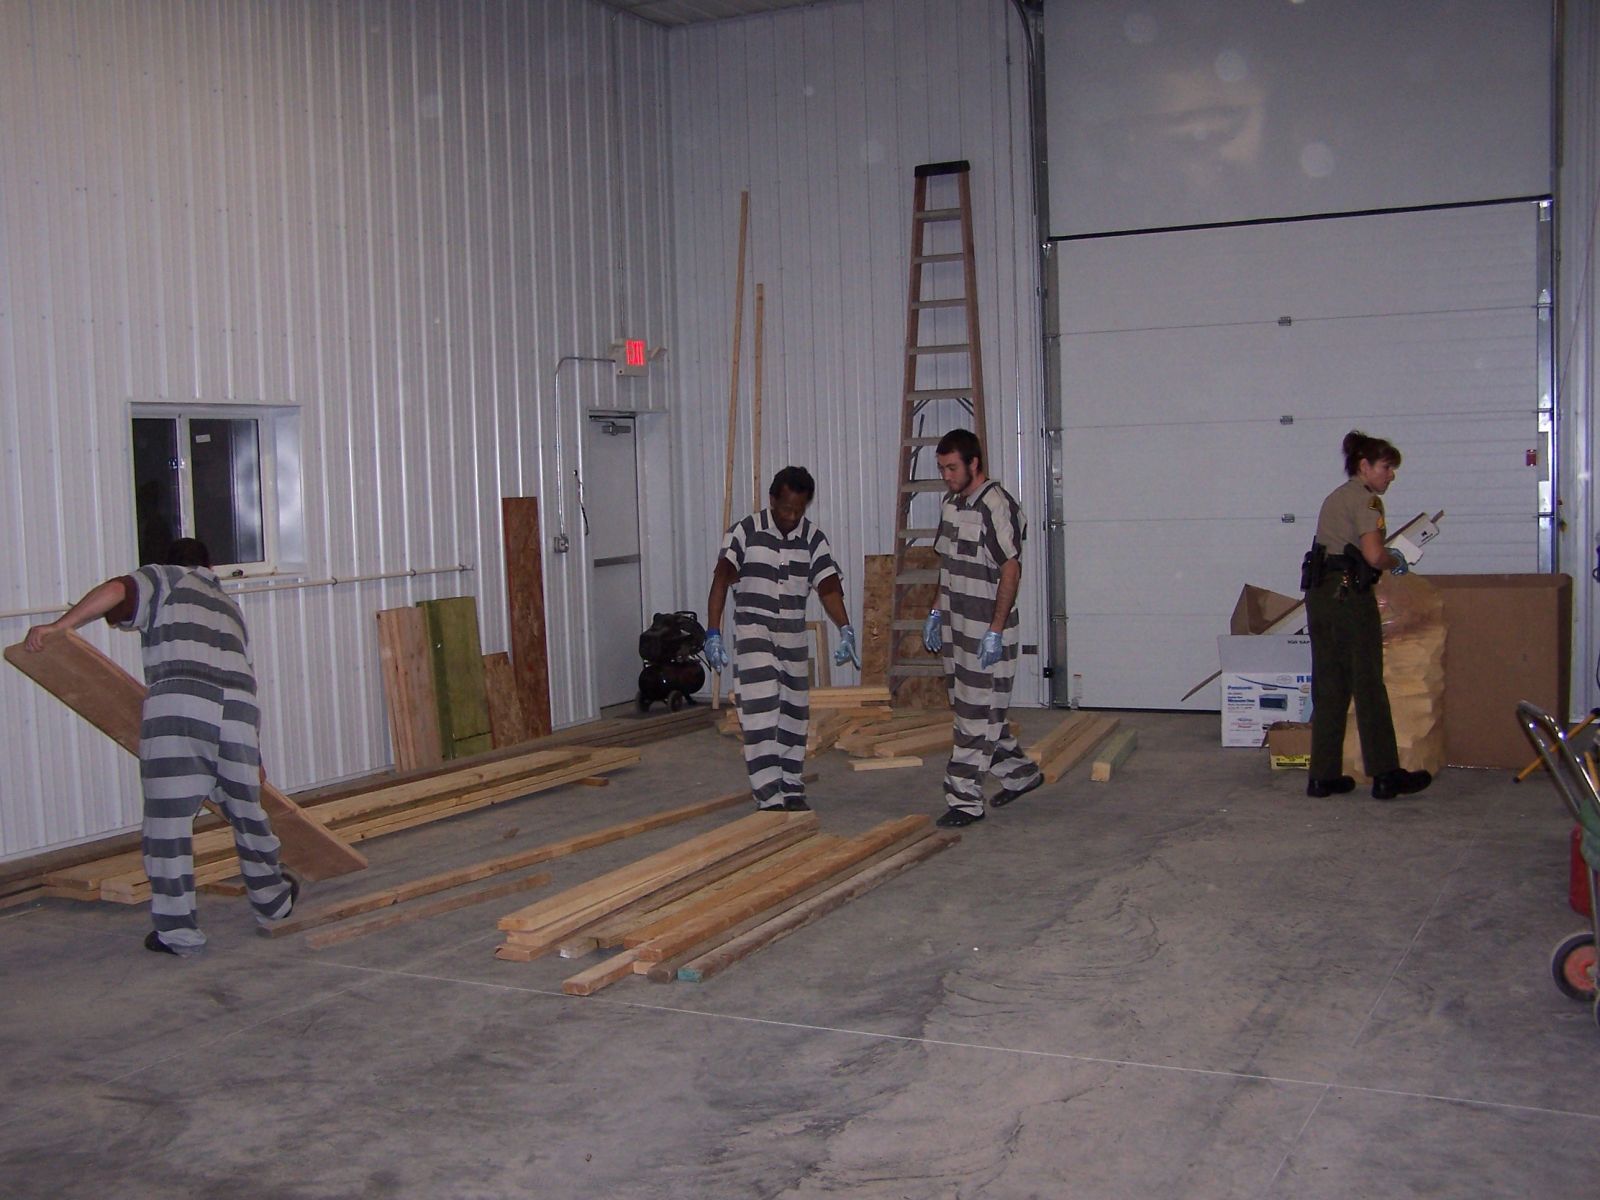 Group of inmates working at the shooting range